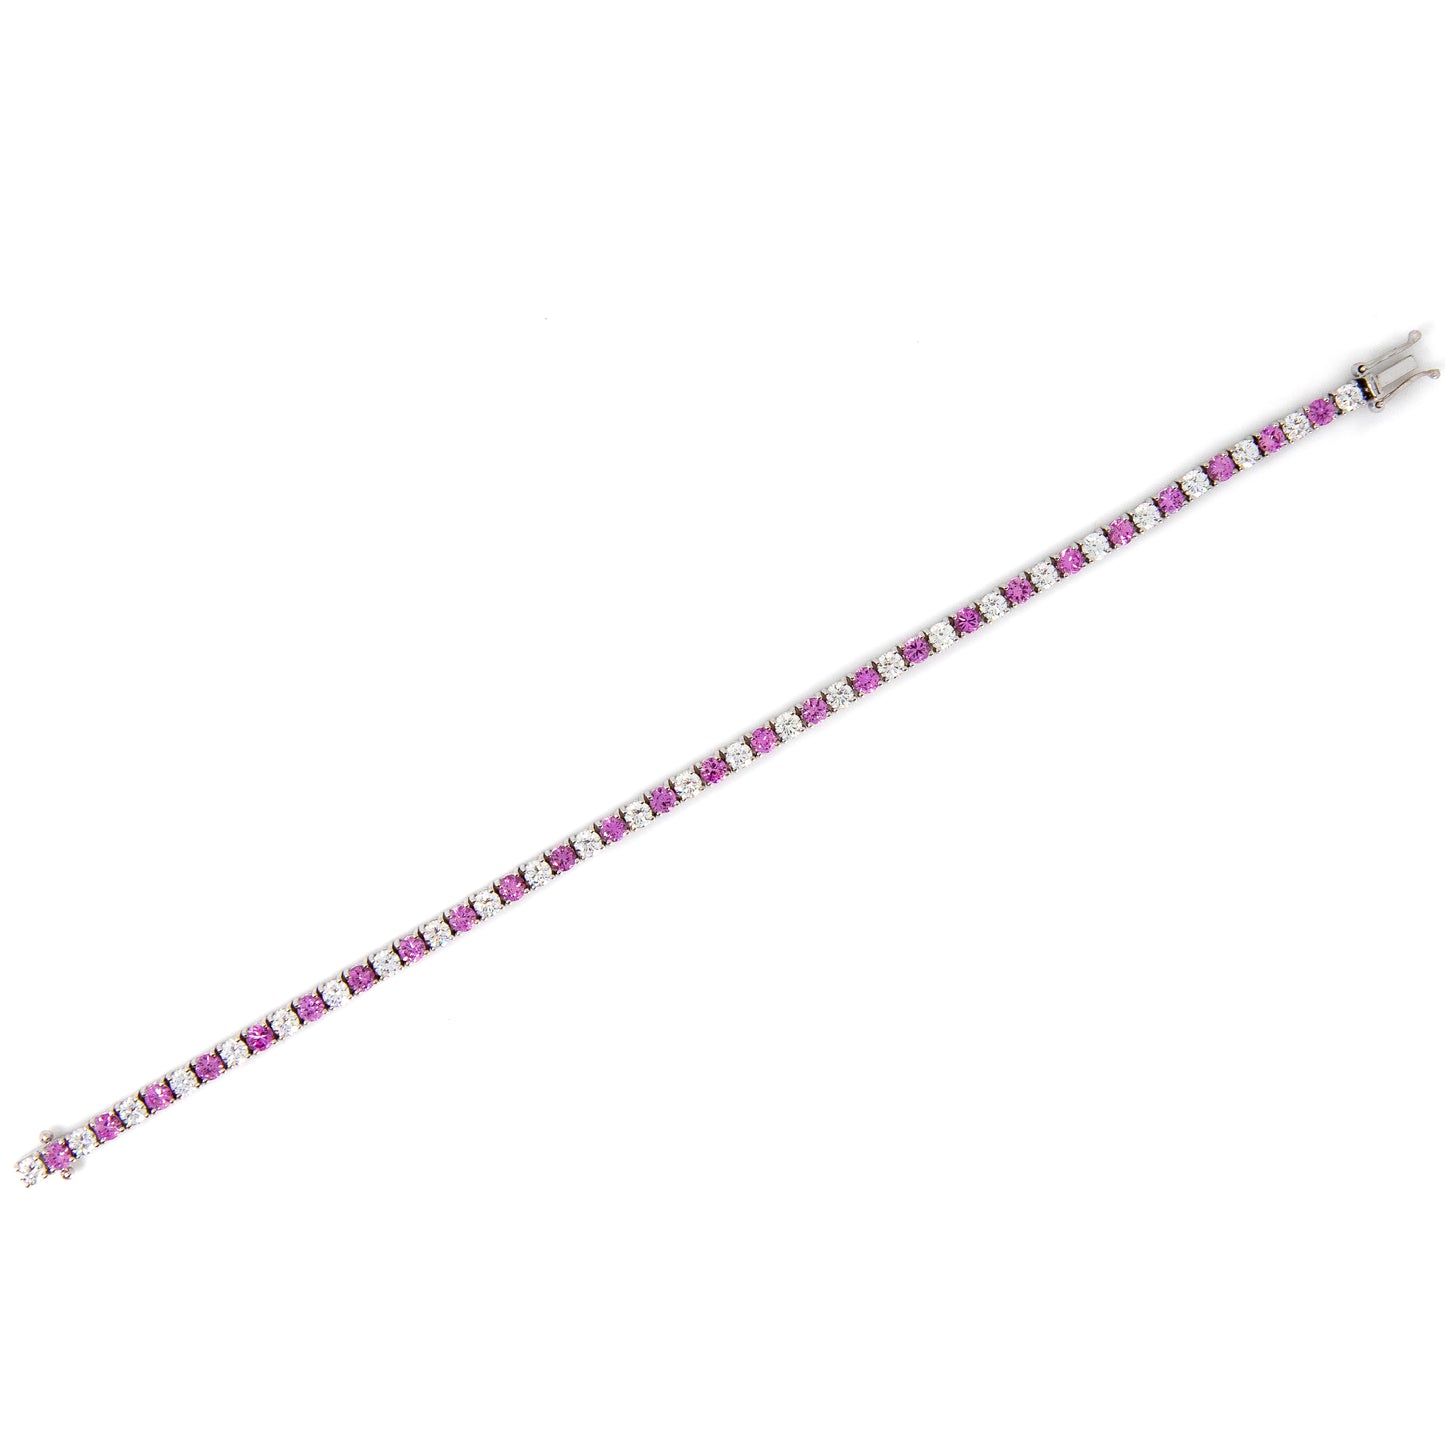 Pink sapphire and diamond bracelet in 18k gold or platinum by Valentina Fine Jewellery